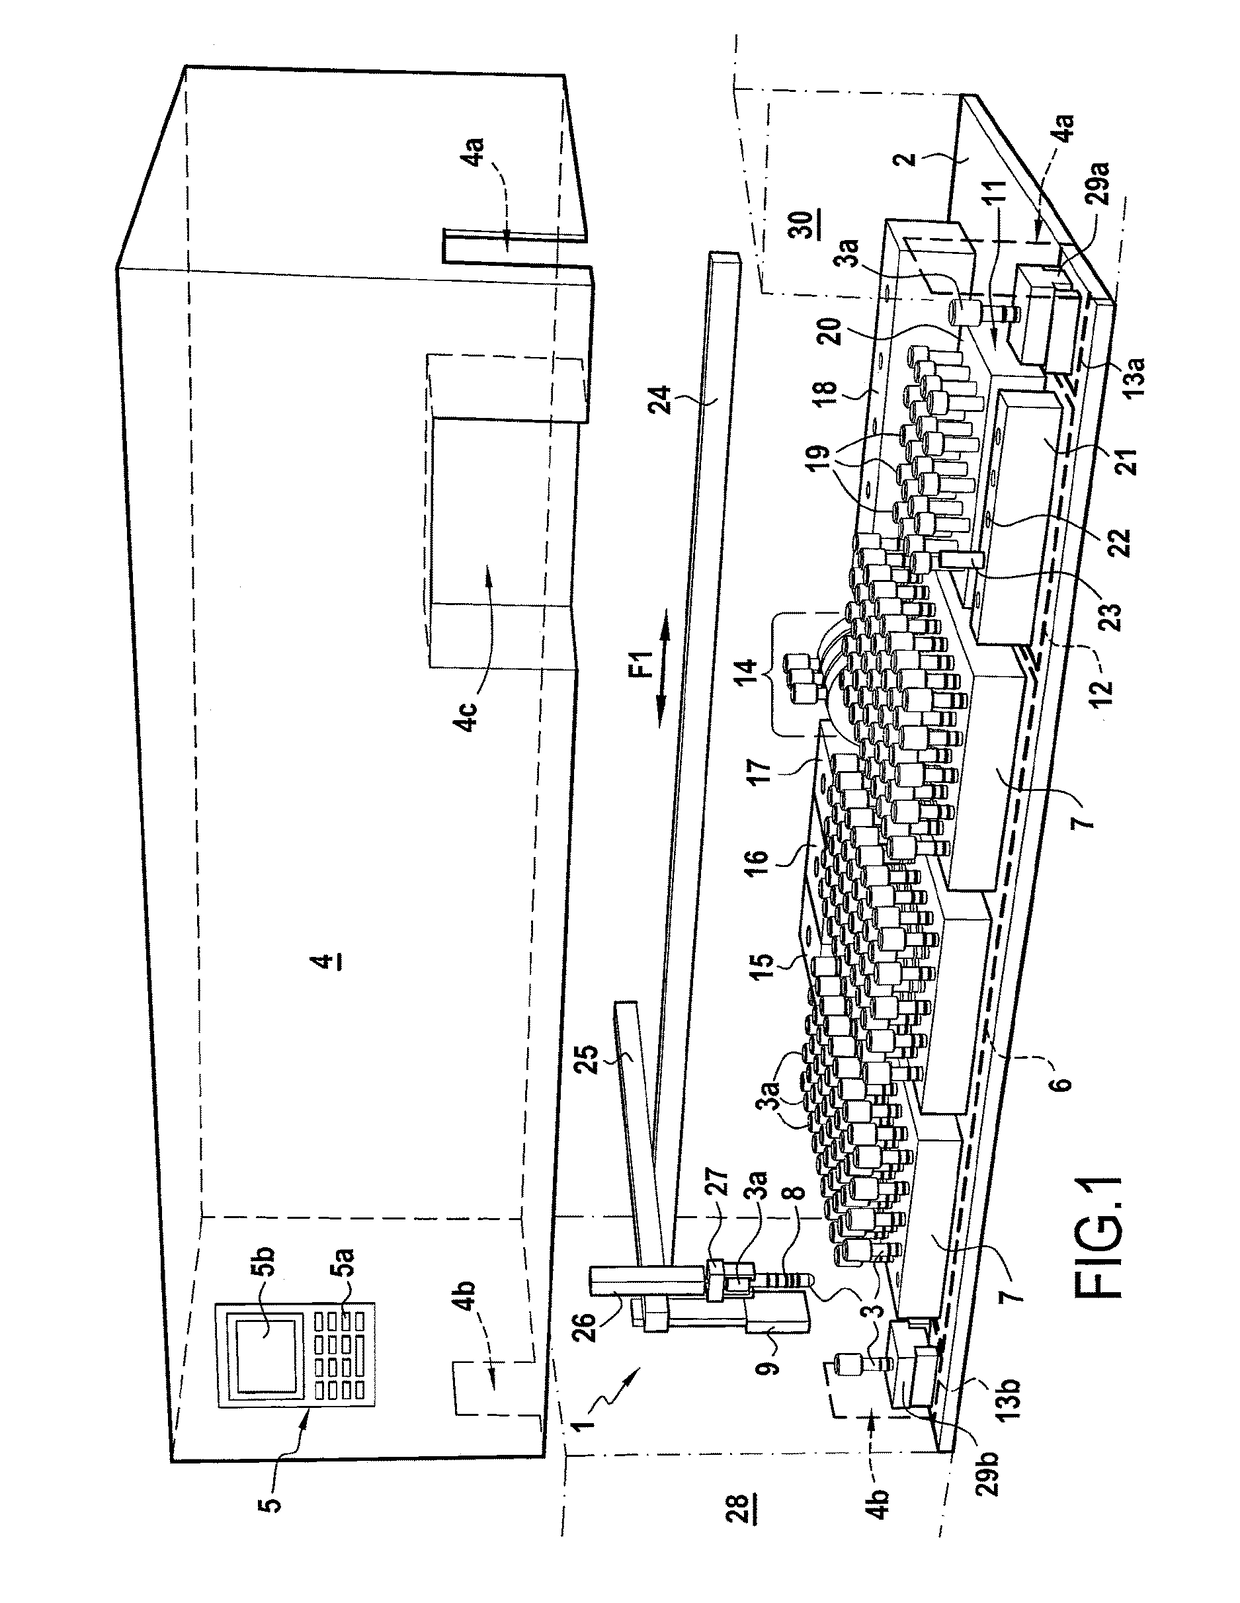 Automatic method of preparing samples of total blood for analysis, and an automatic device for implementing the method